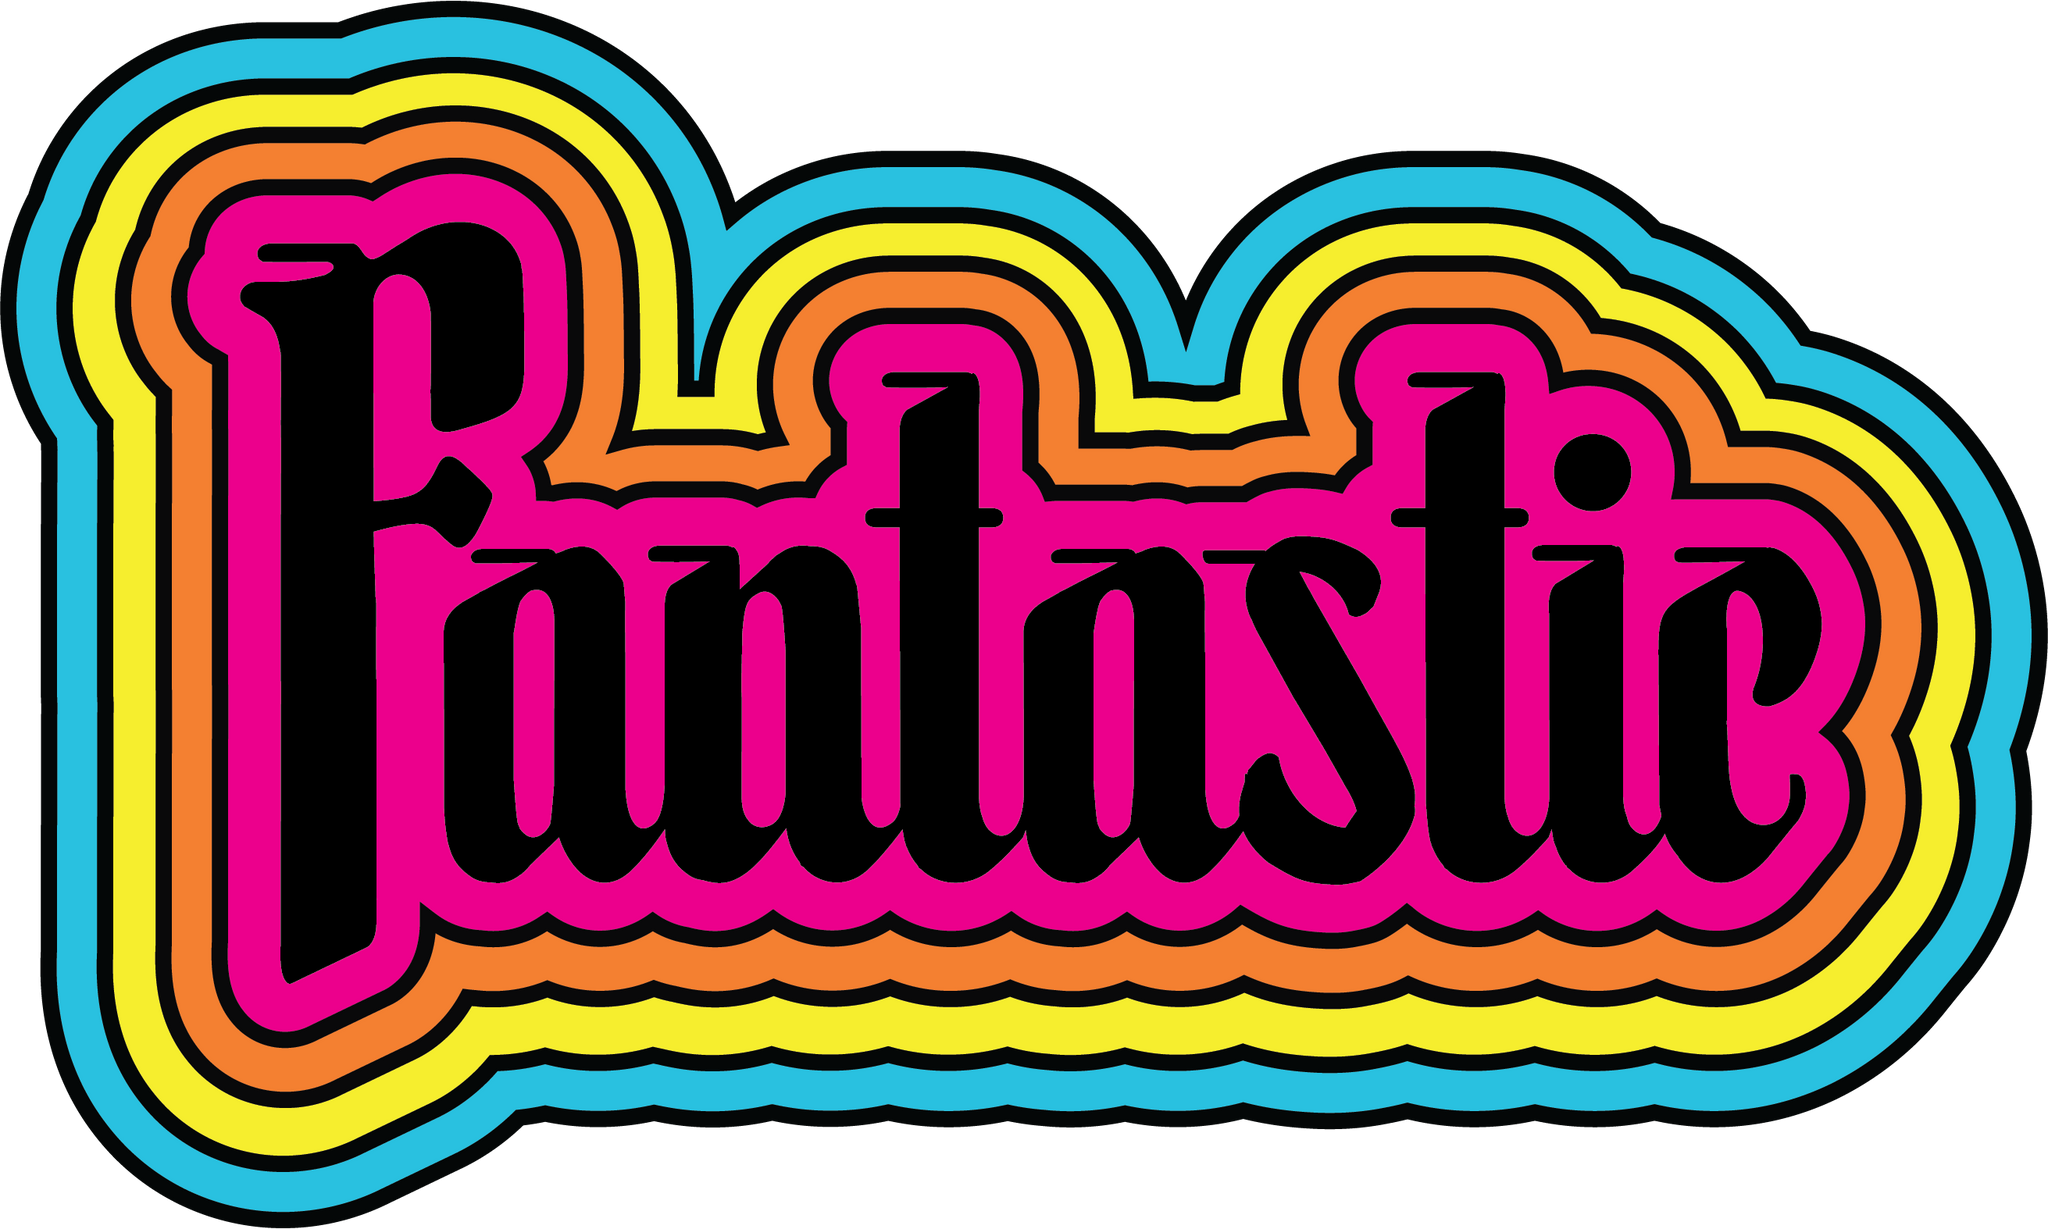 the word fantastic with rainbow design around it